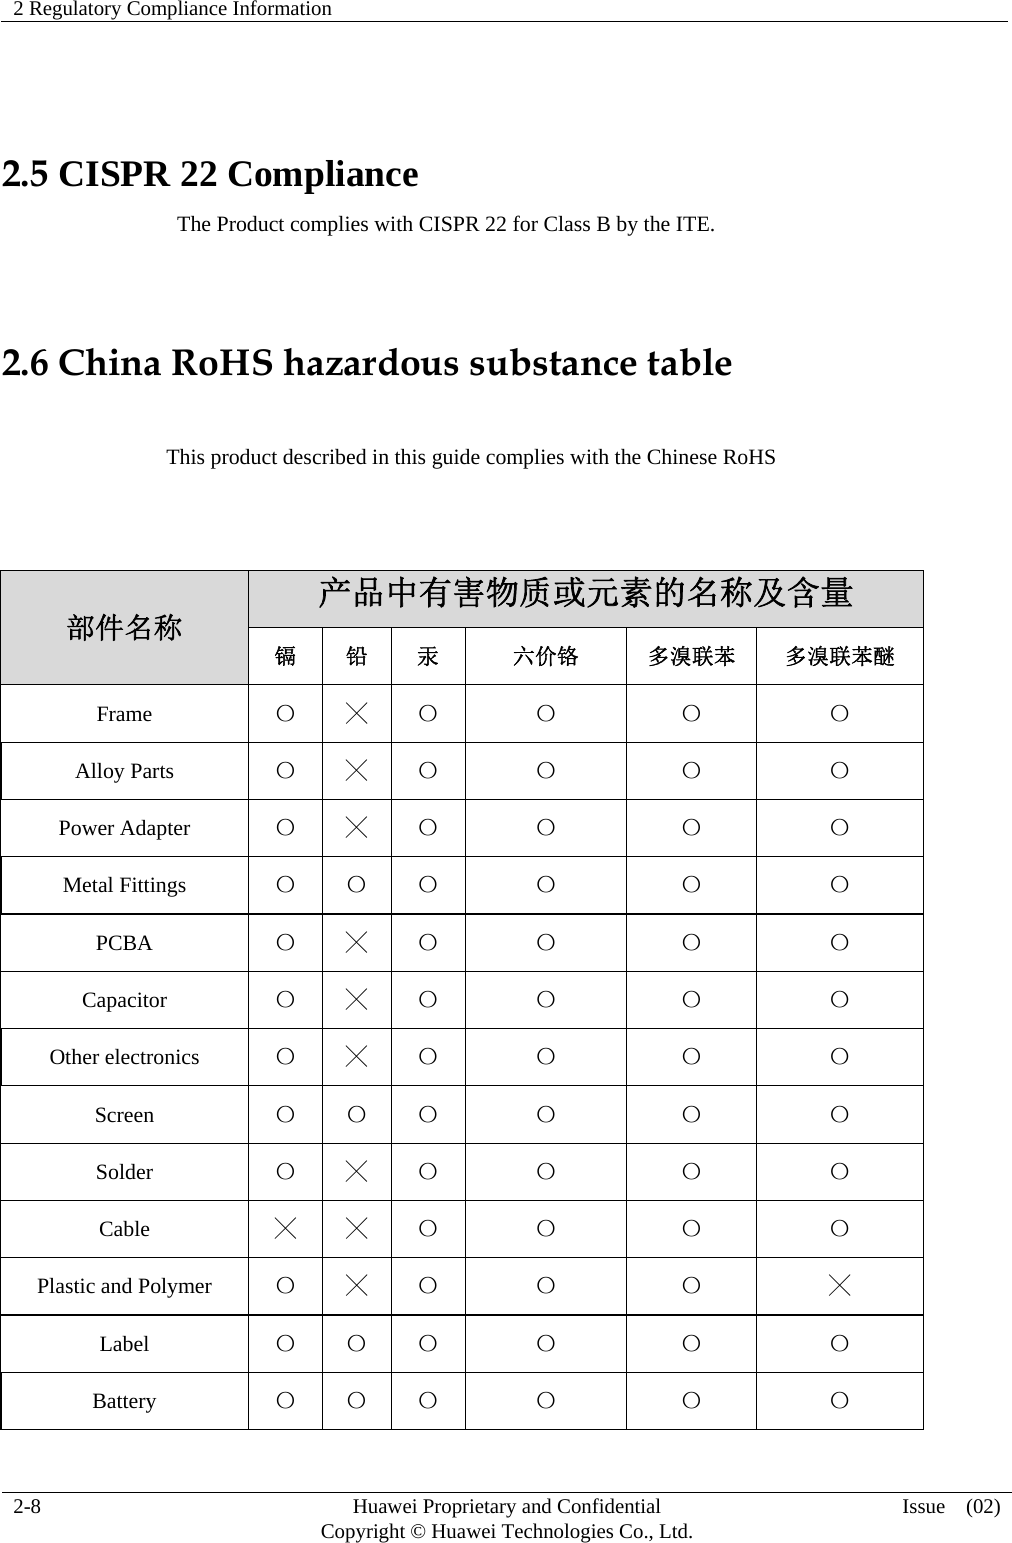 2 Regulatory Compliance Information     2-8  Huawei Proprietary and Confidential         Copyright © Huawei Technologies Co., Ltd.  Issue  (02)   2.5 CISPR 22 Compliance                                 The Product complies with CISPR 22 for Class B by the ITE.  2.6 China RoHS hazardous substance table                 This product described in this guide complies with the Chinese RoHS   部件名称 产品中有害物质或元素的名称及含量 镉 铅 汞 六价铬 多溴联苯 多溴联苯醚 Frame  〇 ╳ 〇 〇 〇 〇 Alloy Parts  〇 ╳ 〇 〇 〇 〇 Power Adapter  〇 ╳ 〇 〇 〇 〇 Metal Fittings  〇 〇 〇 〇 〇 〇 PCBA  〇 ╳ 〇 〇 〇 〇 Capacitor  〇 ╳ 〇 〇 〇 〇 Other electronics  〇 ╳ 〇 〇 〇 〇 Screen  〇 〇 〇 〇 〇 〇 Solder  〇 ╳ 〇 〇 〇 〇 Cable  ╳ ╳ 〇 〇 〇 〇 Plastic and Polymer  〇 ╳ 〇 〇 〇 ╳ Label  〇 〇 〇 〇 〇 〇 Battery  〇 〇 〇 〇 〇 〇 